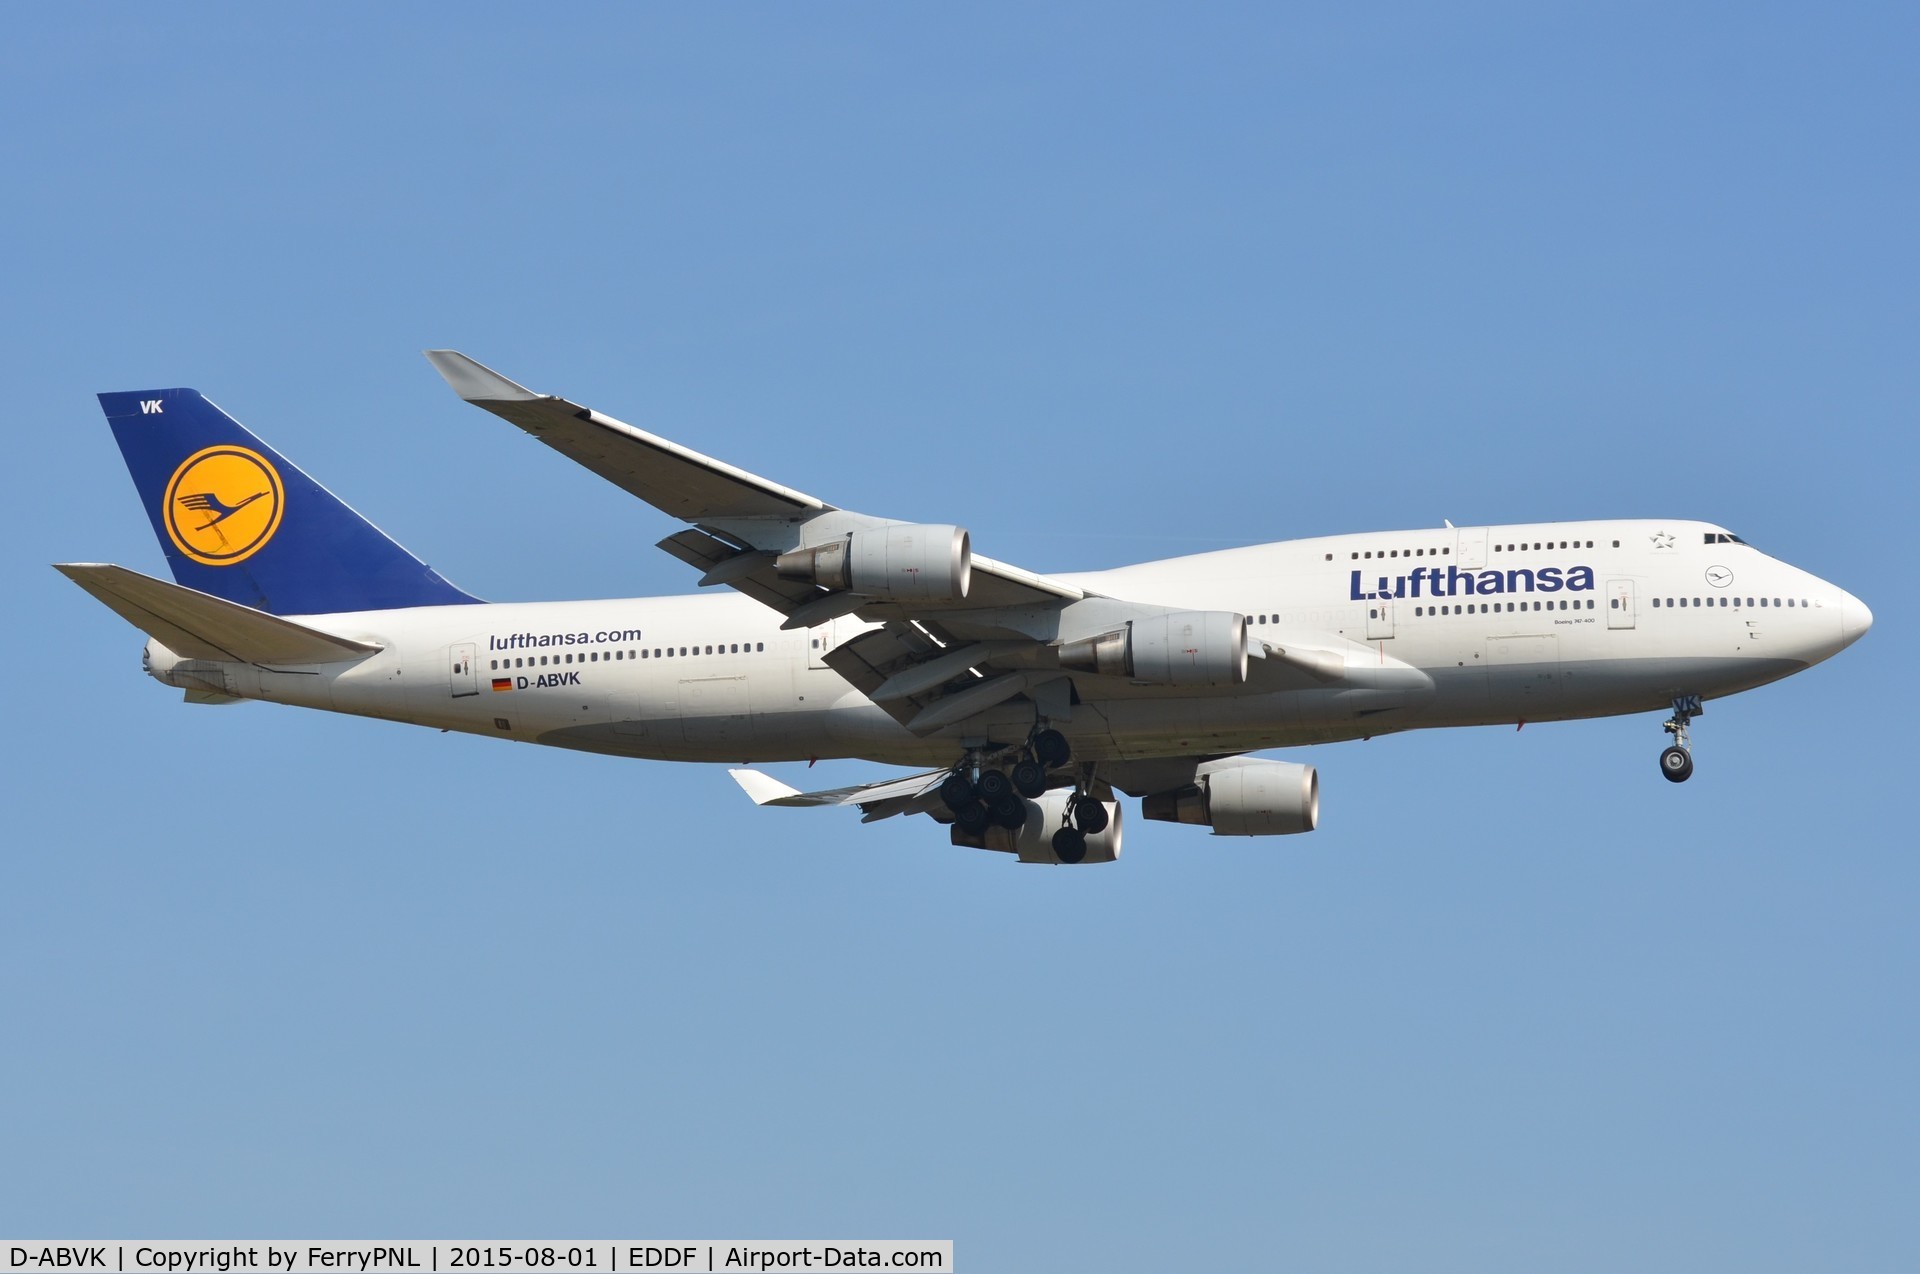 D-ABVK, 1991 Boeing 747-430 C/N 25046, Lufthansa B744 wfu in Sept 2015 and subsequently scrapped in TUL.